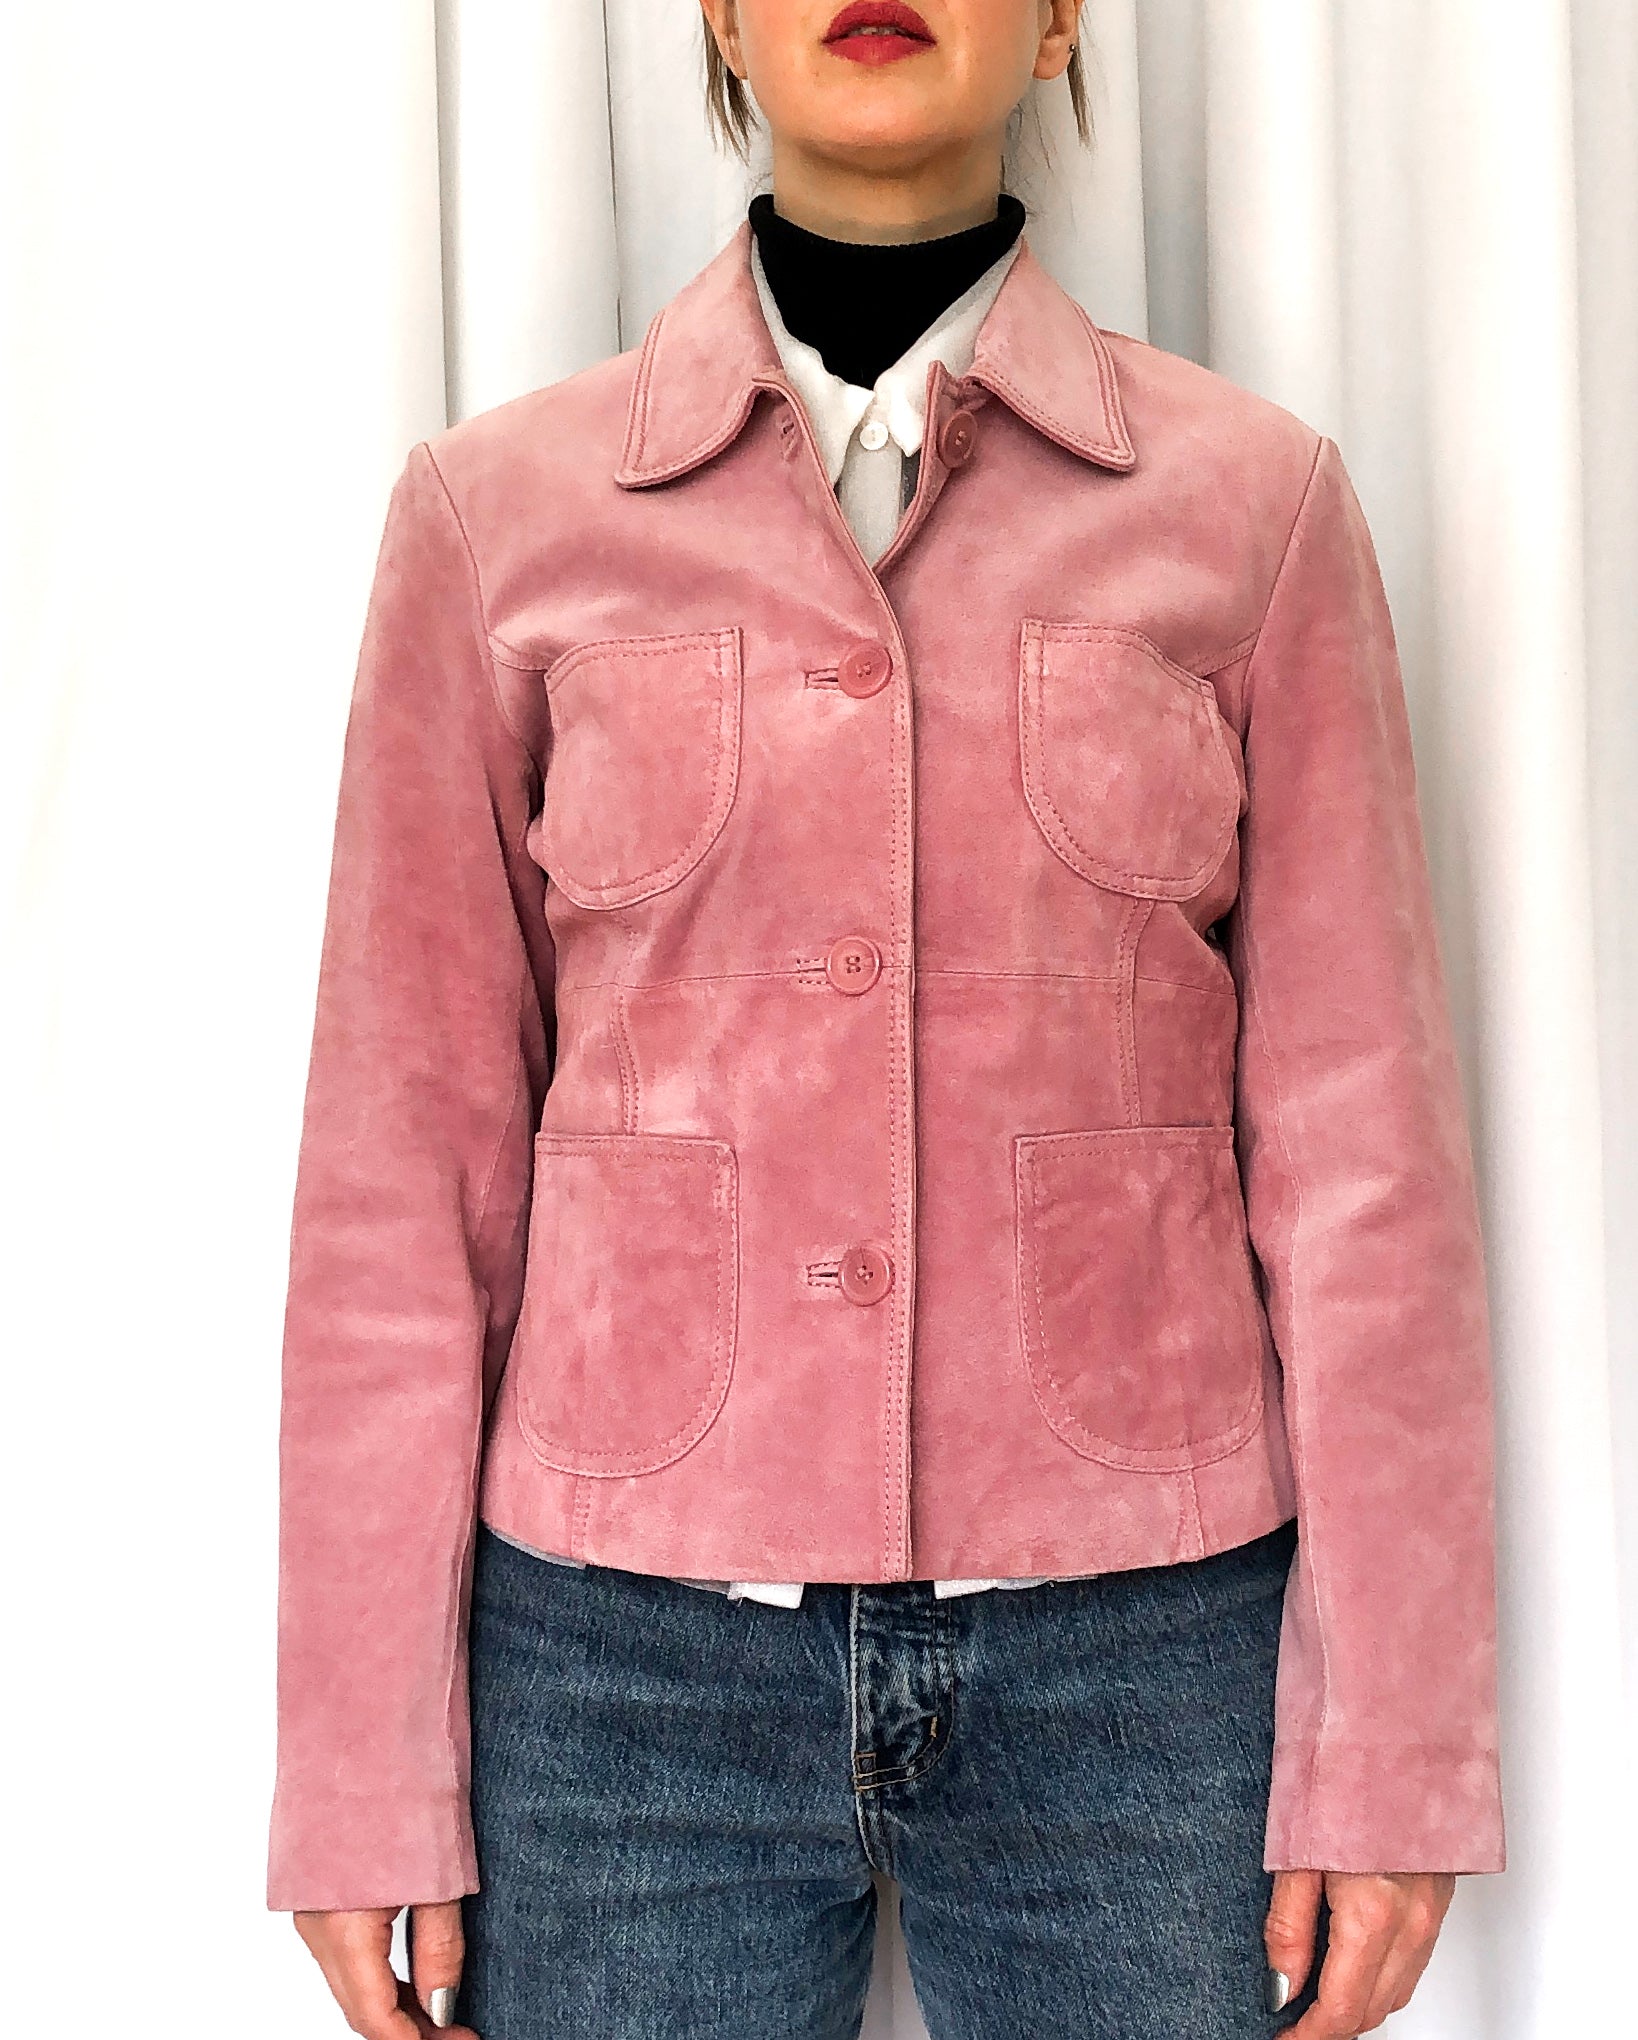 Danier Hot Pink Suede Jacket, Size Small